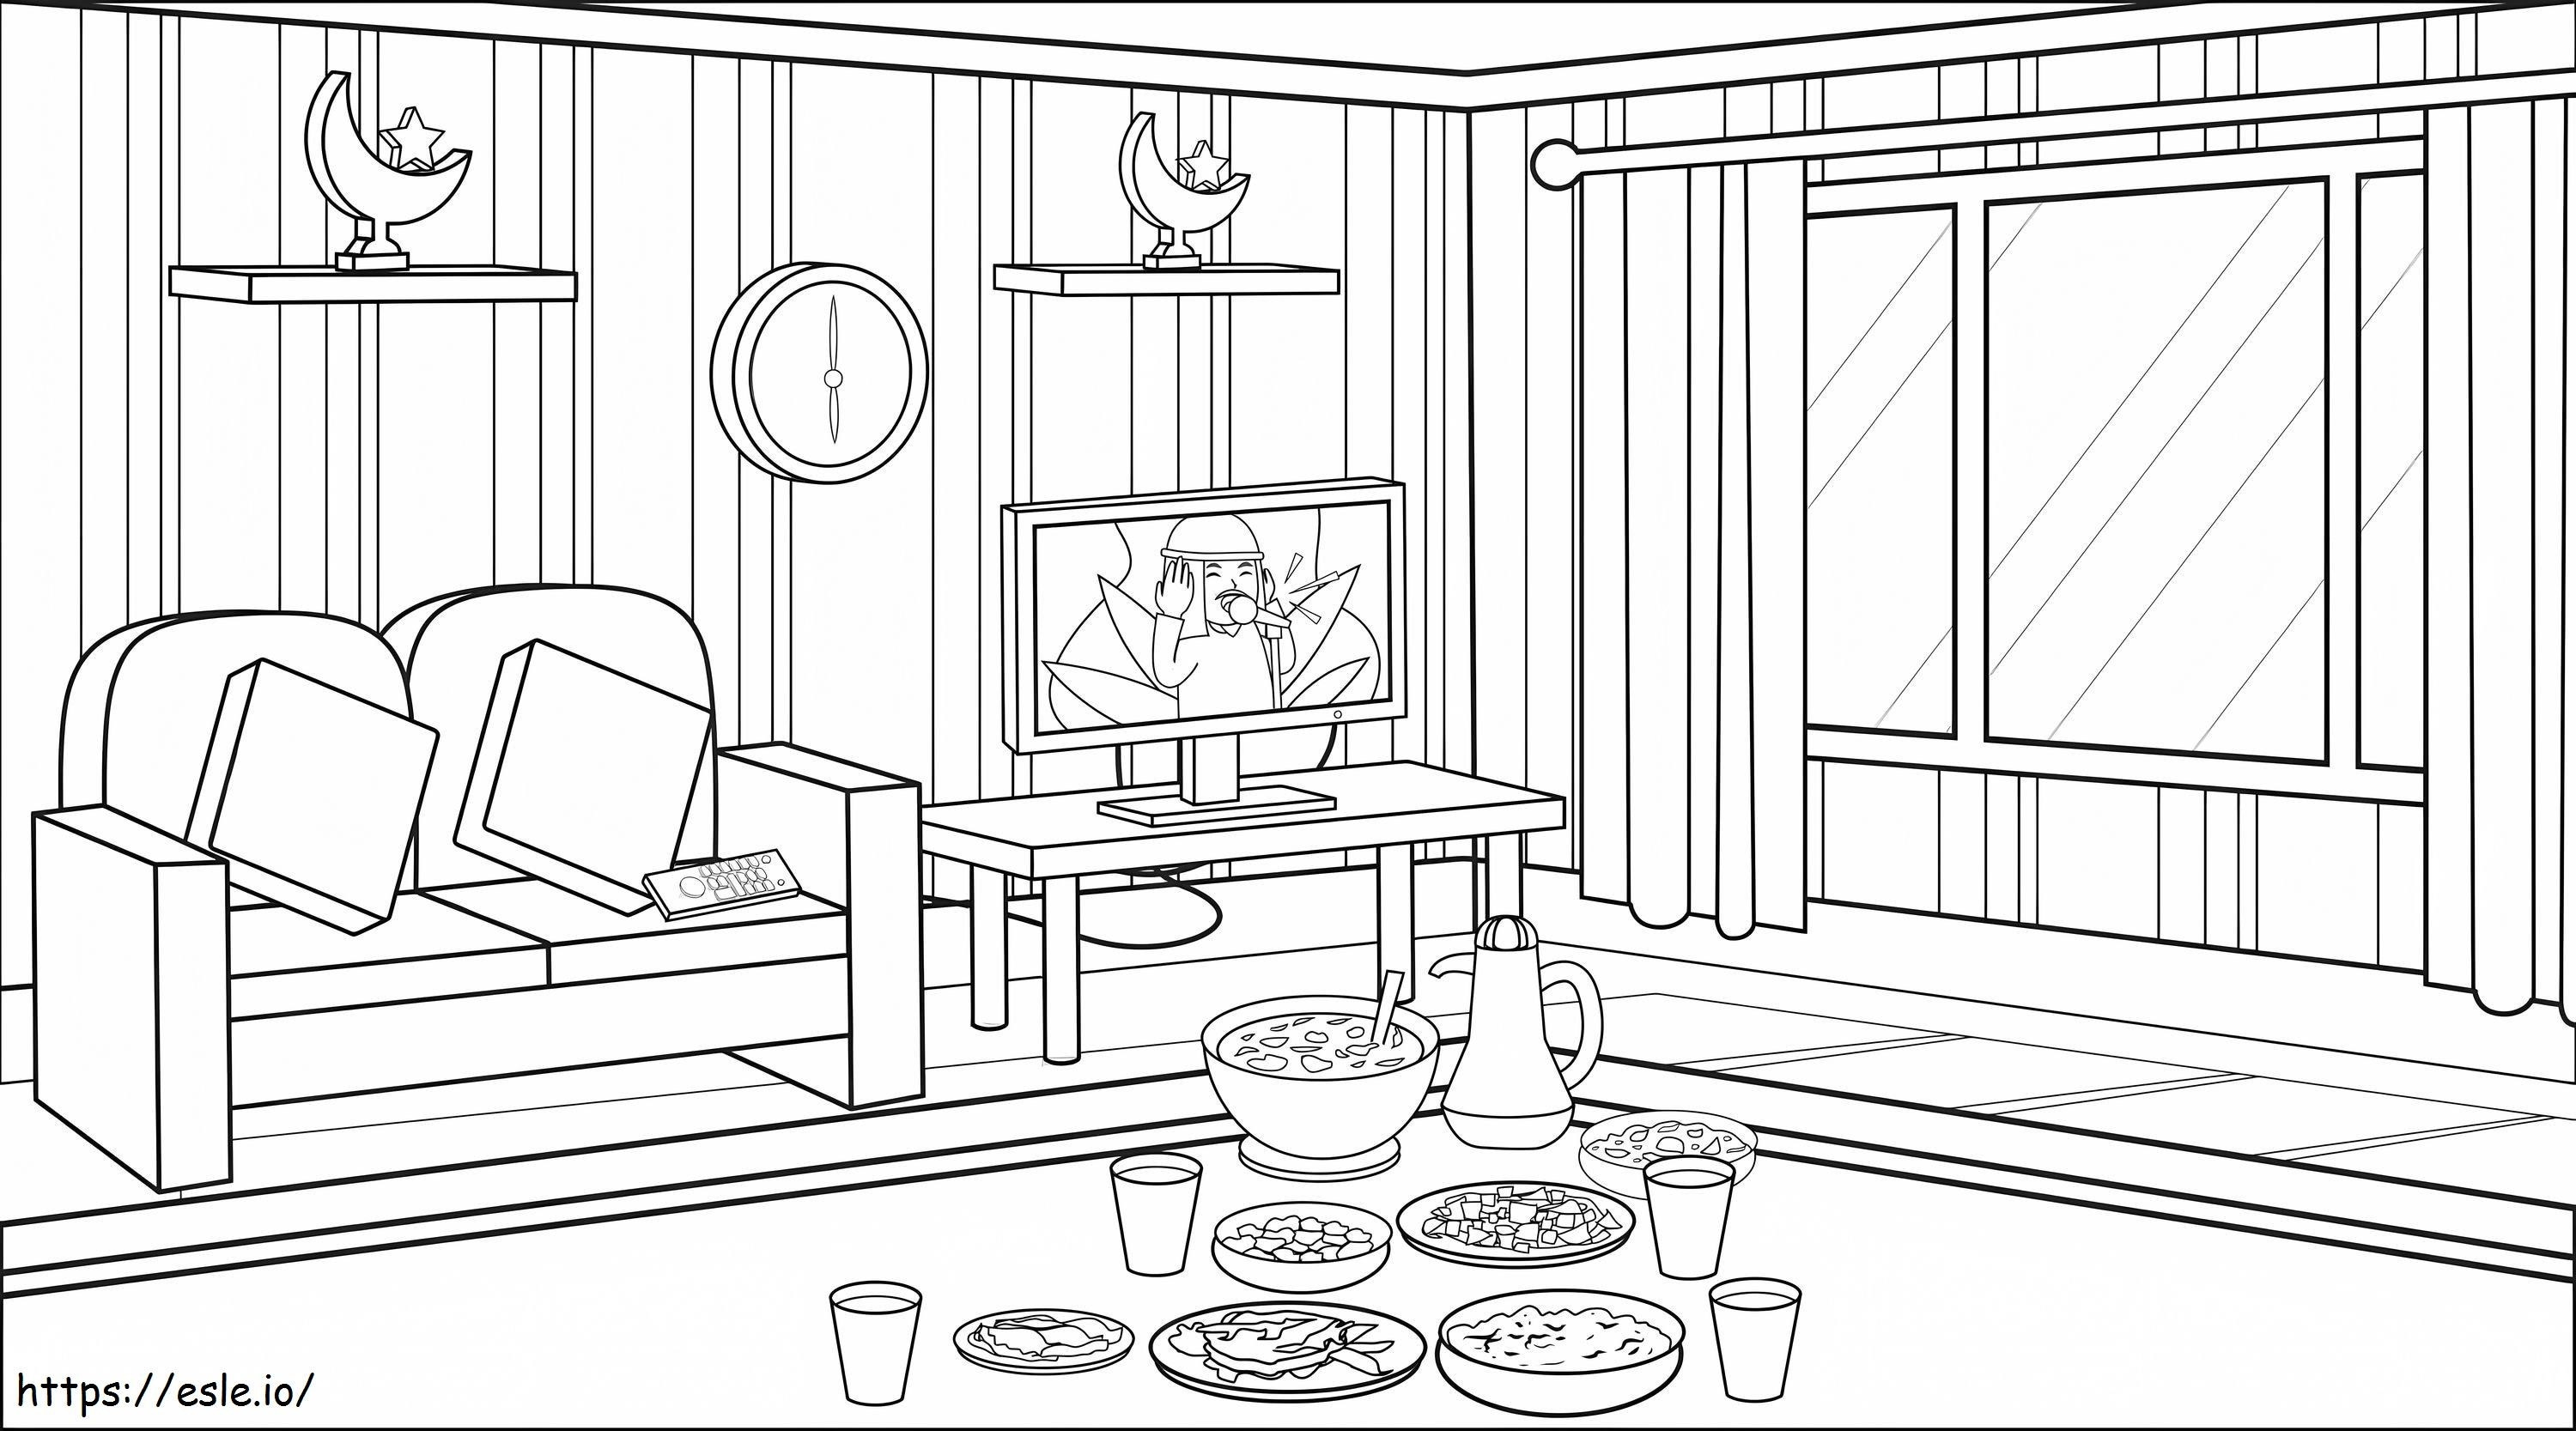 Living Room Free Images coloring page